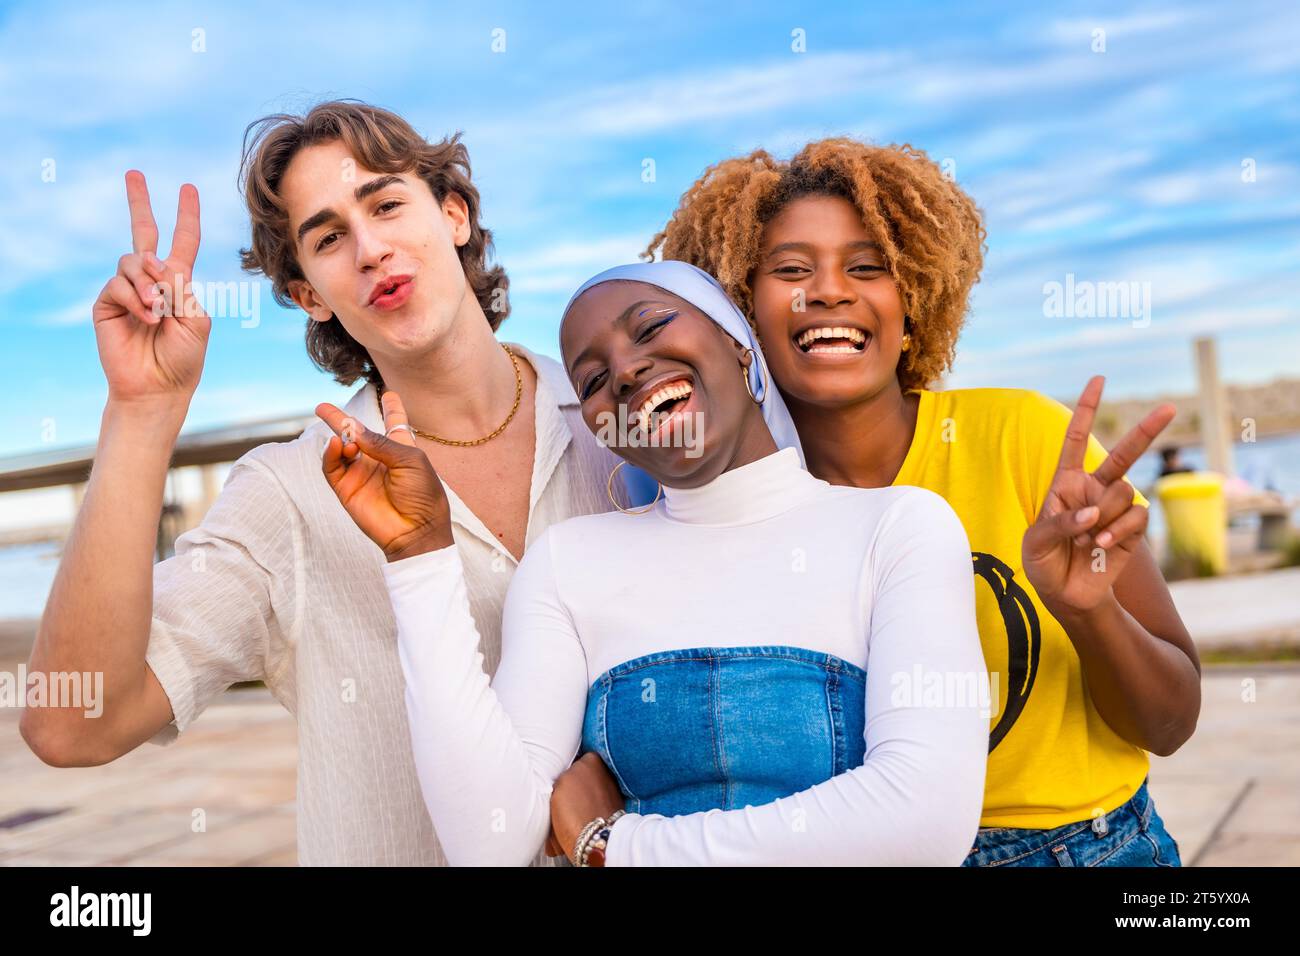 Portrait of three friends gesturing peace while smiling in an urban space Stock Photo